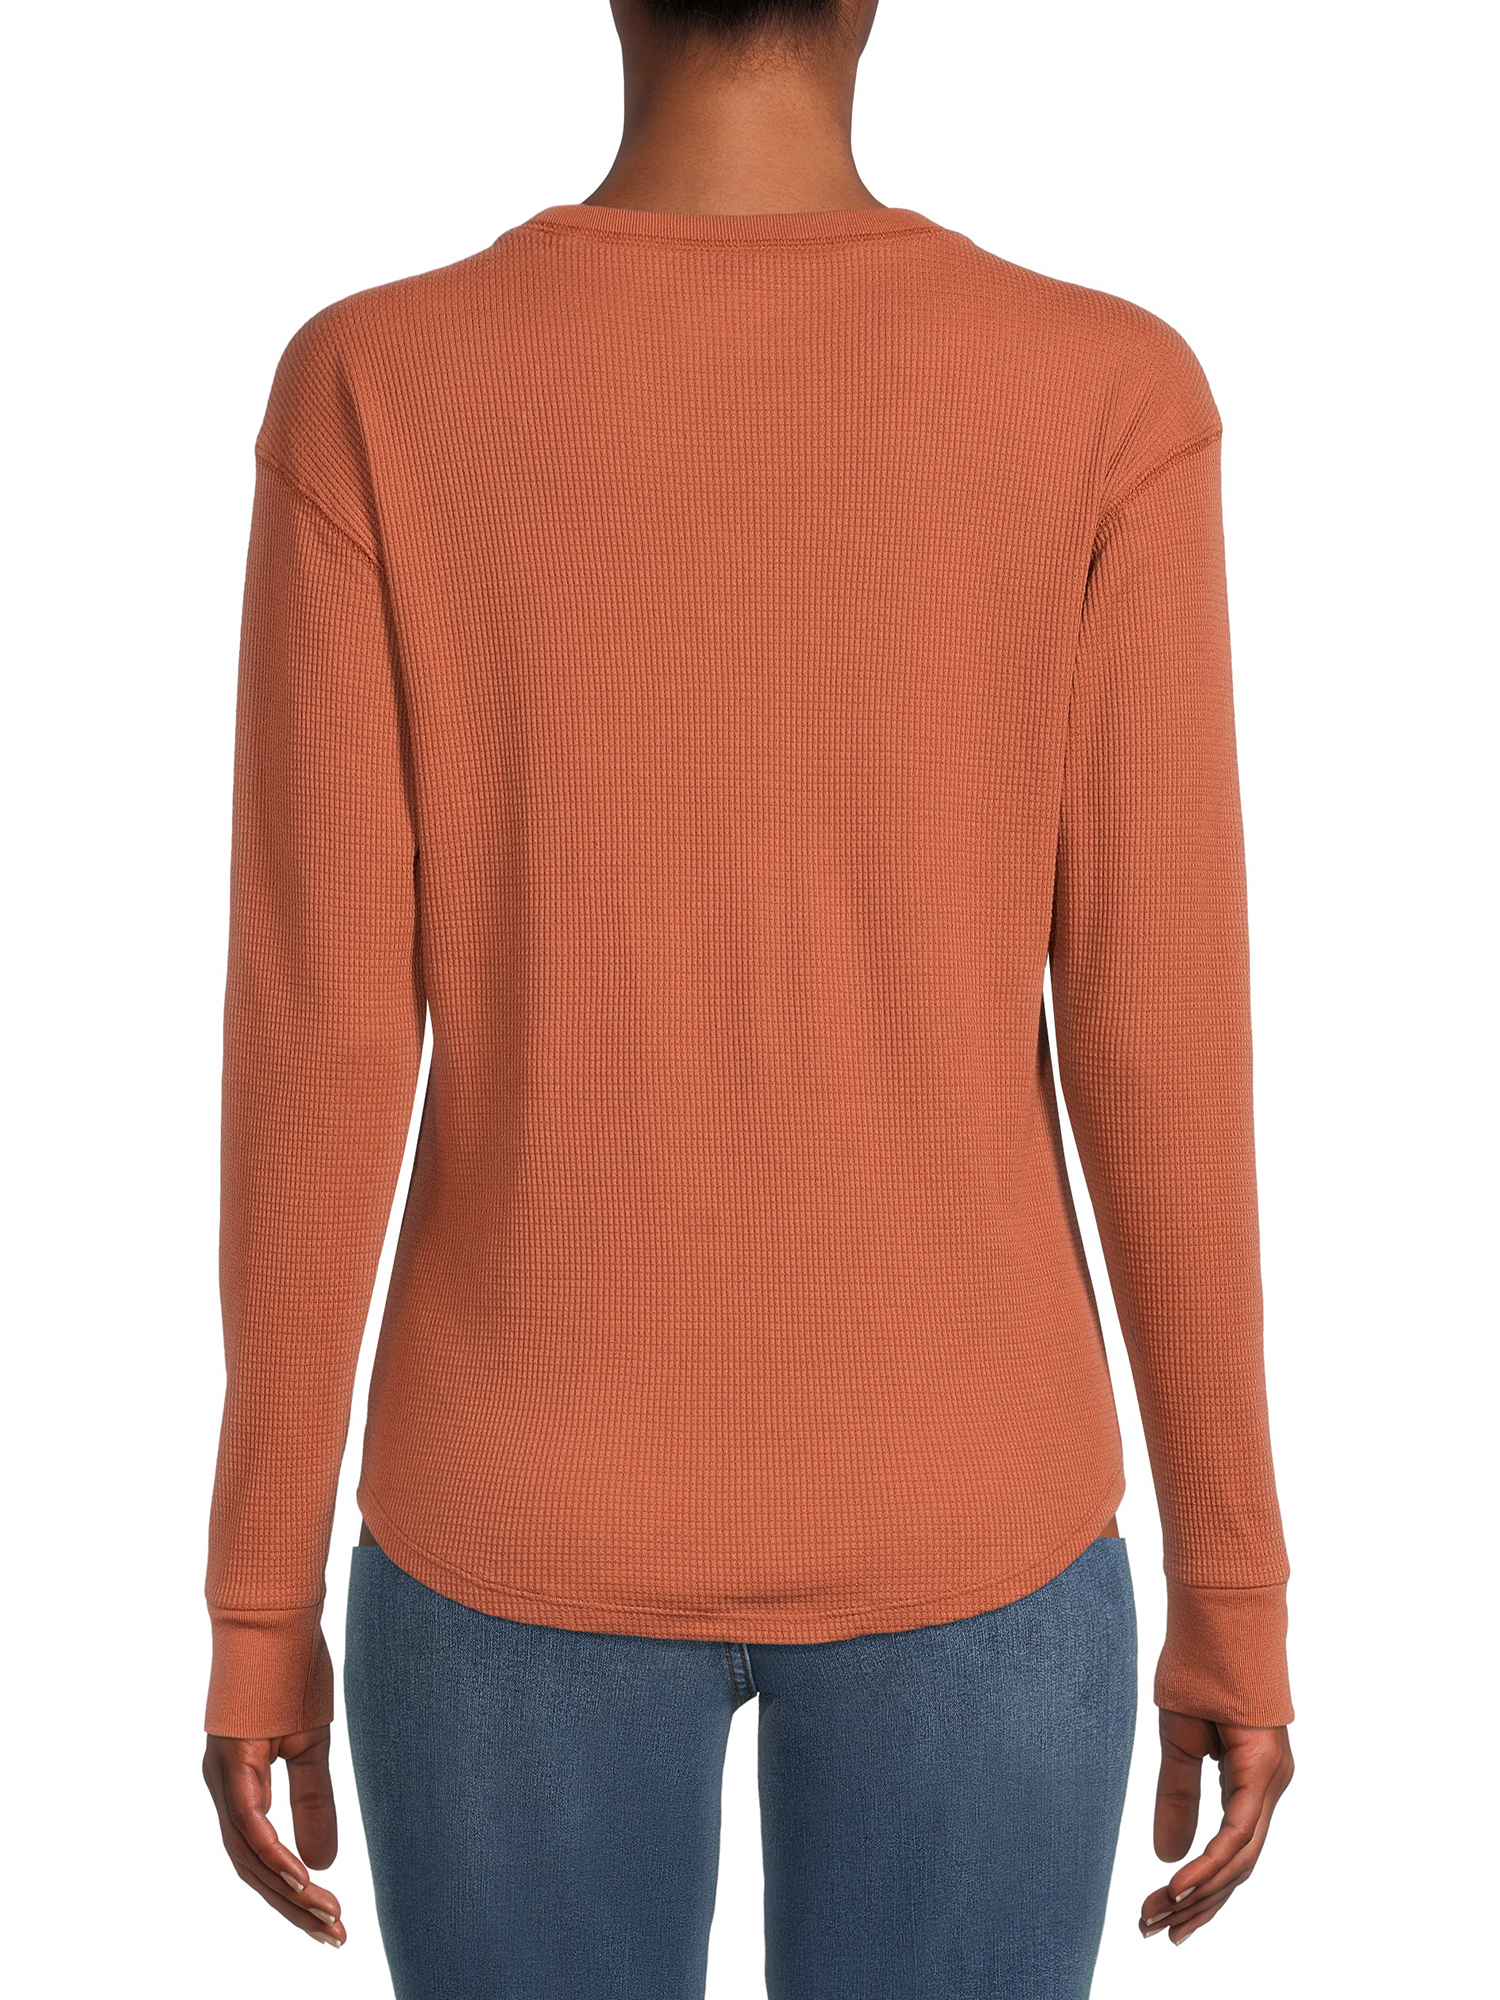 Time and Tru Women's Thermal Top with Long Sleeves - image 4 of 5